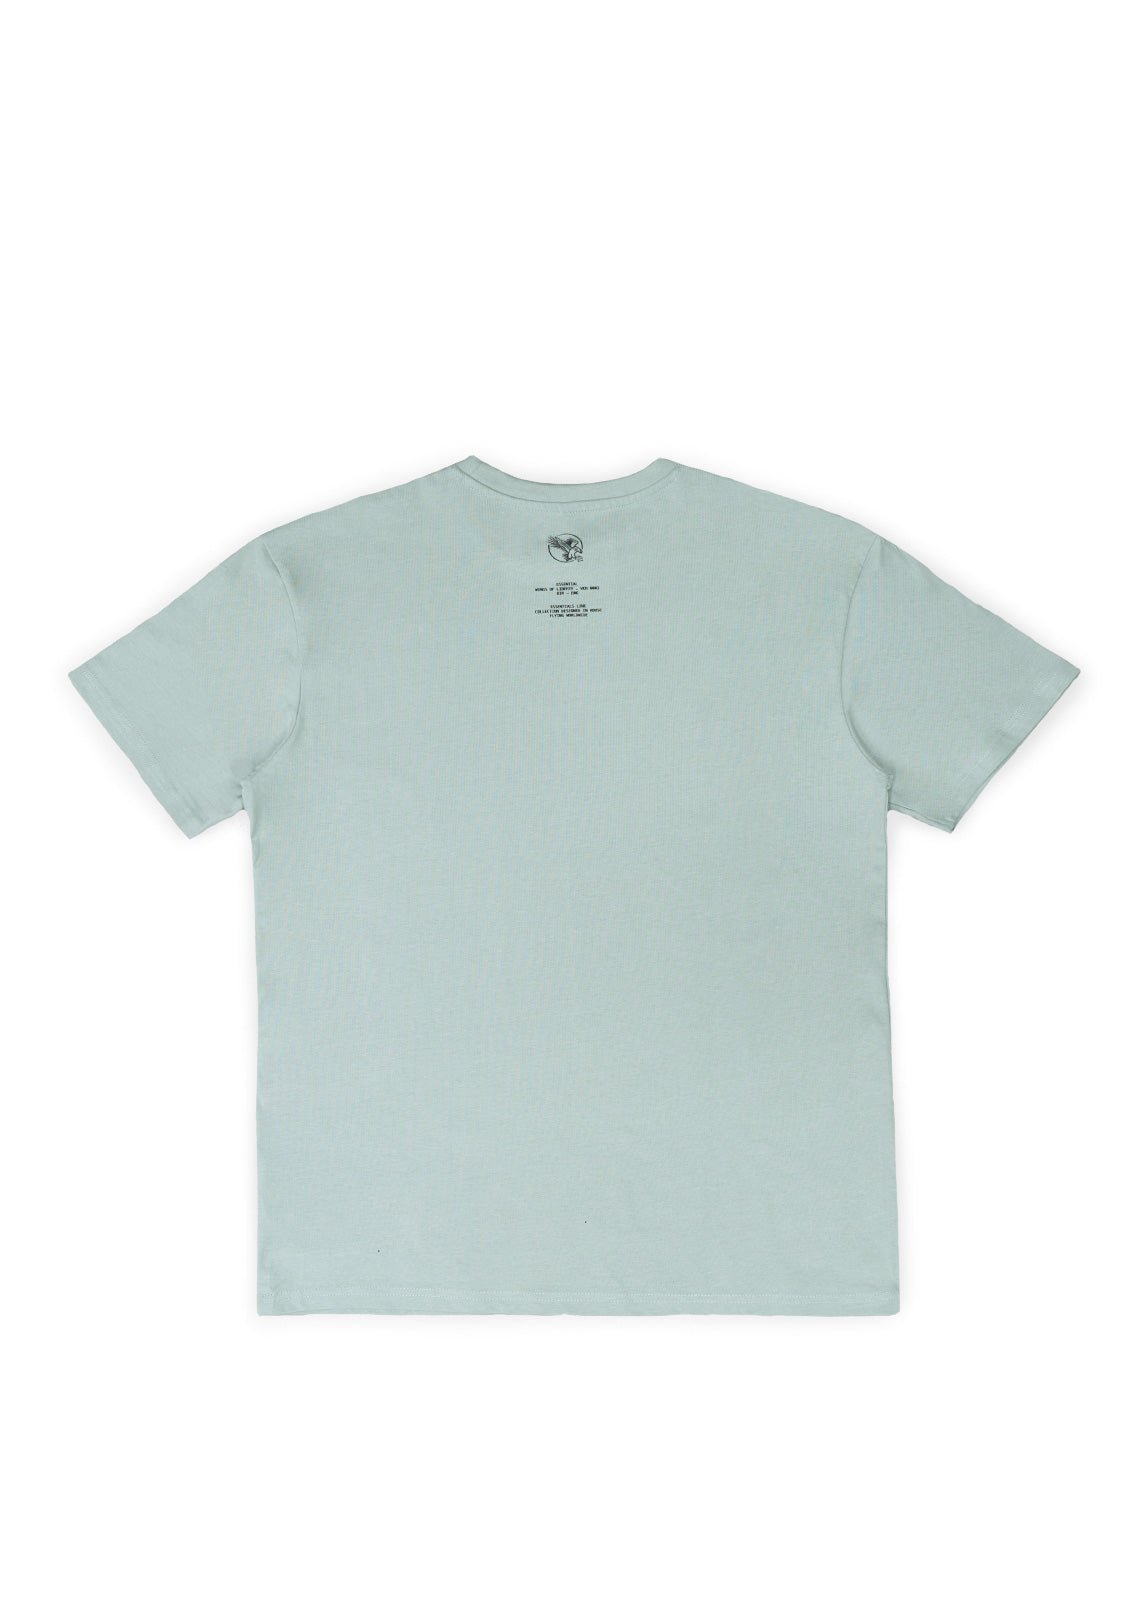 Mist Grey Essential T-Shirt - Wings Of Liberty Clothing